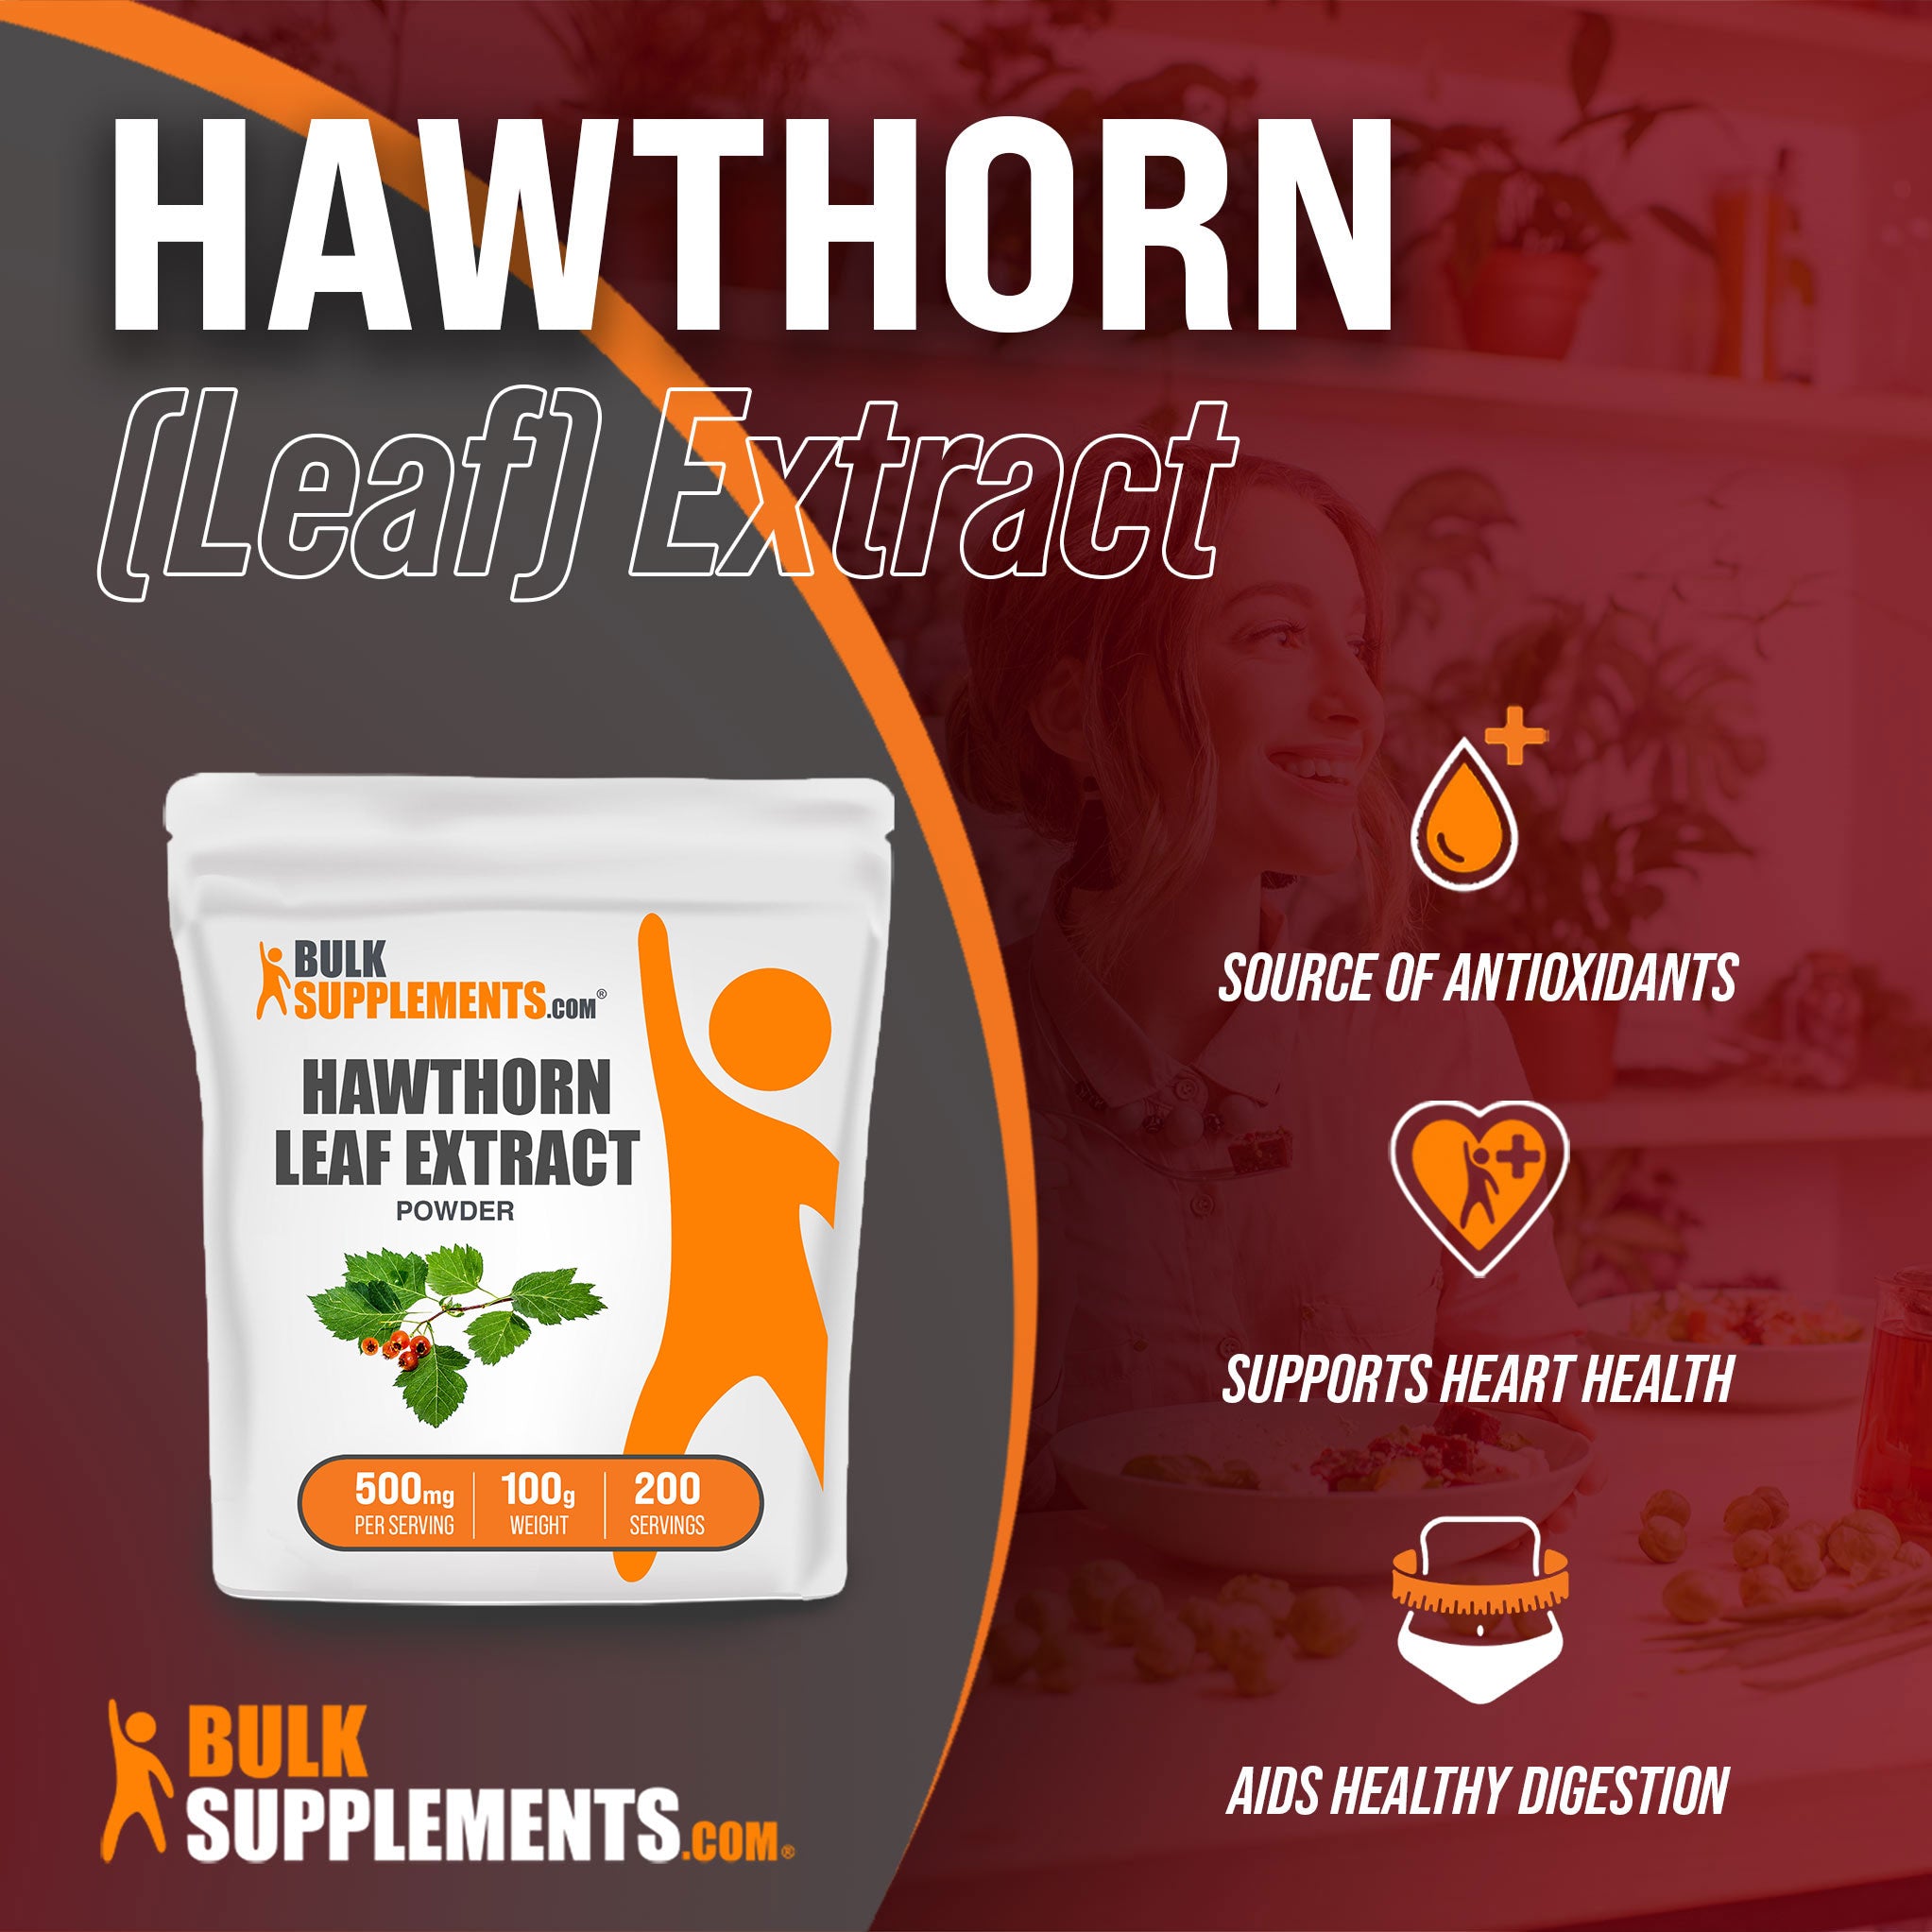 Benefits of Hawthorn Leaf Extract; source of antioxidants, supports heart health, aids healthy digestion